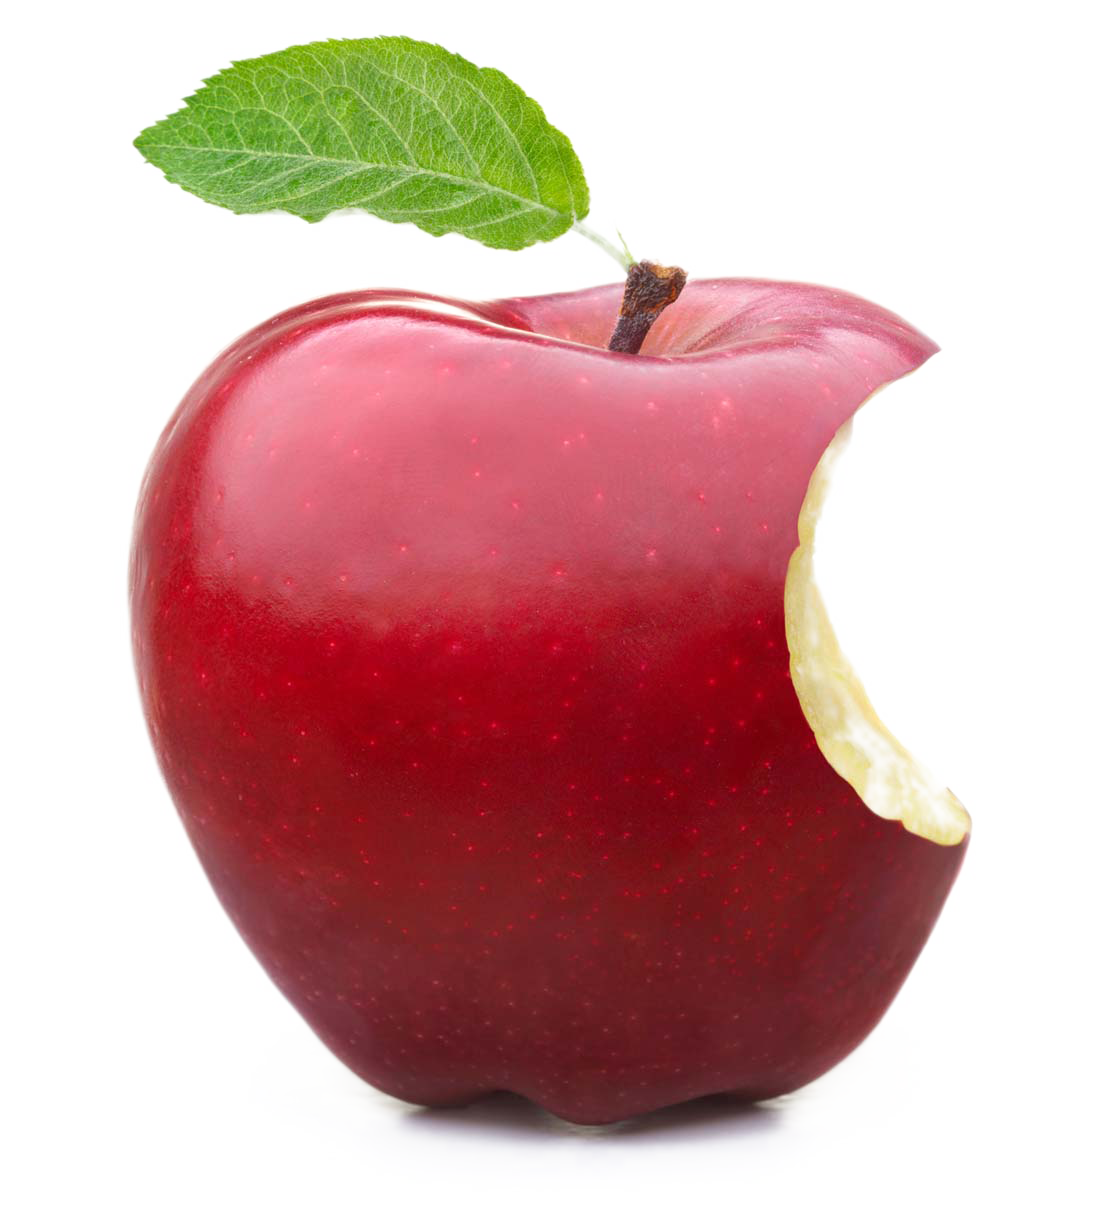 Apple Food Bite Shutterstock Crumble Fruit Red PNG Image